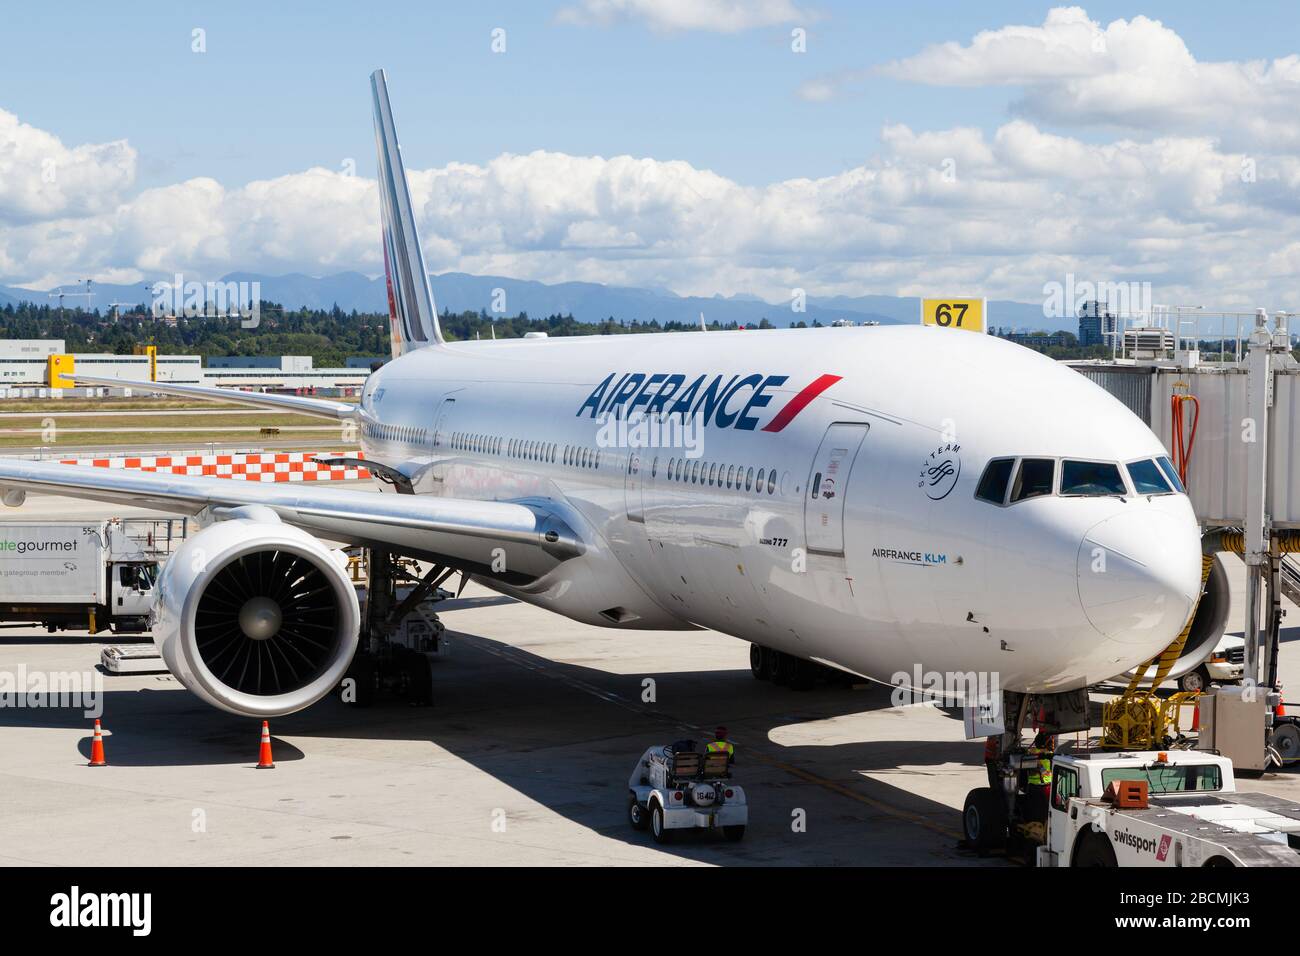 Vancouver, Canada - July 3, 2017: An Air France Airlines Boeing 777 plane being serviced on the tarmac of Vancouver International Airport. Stock Photo